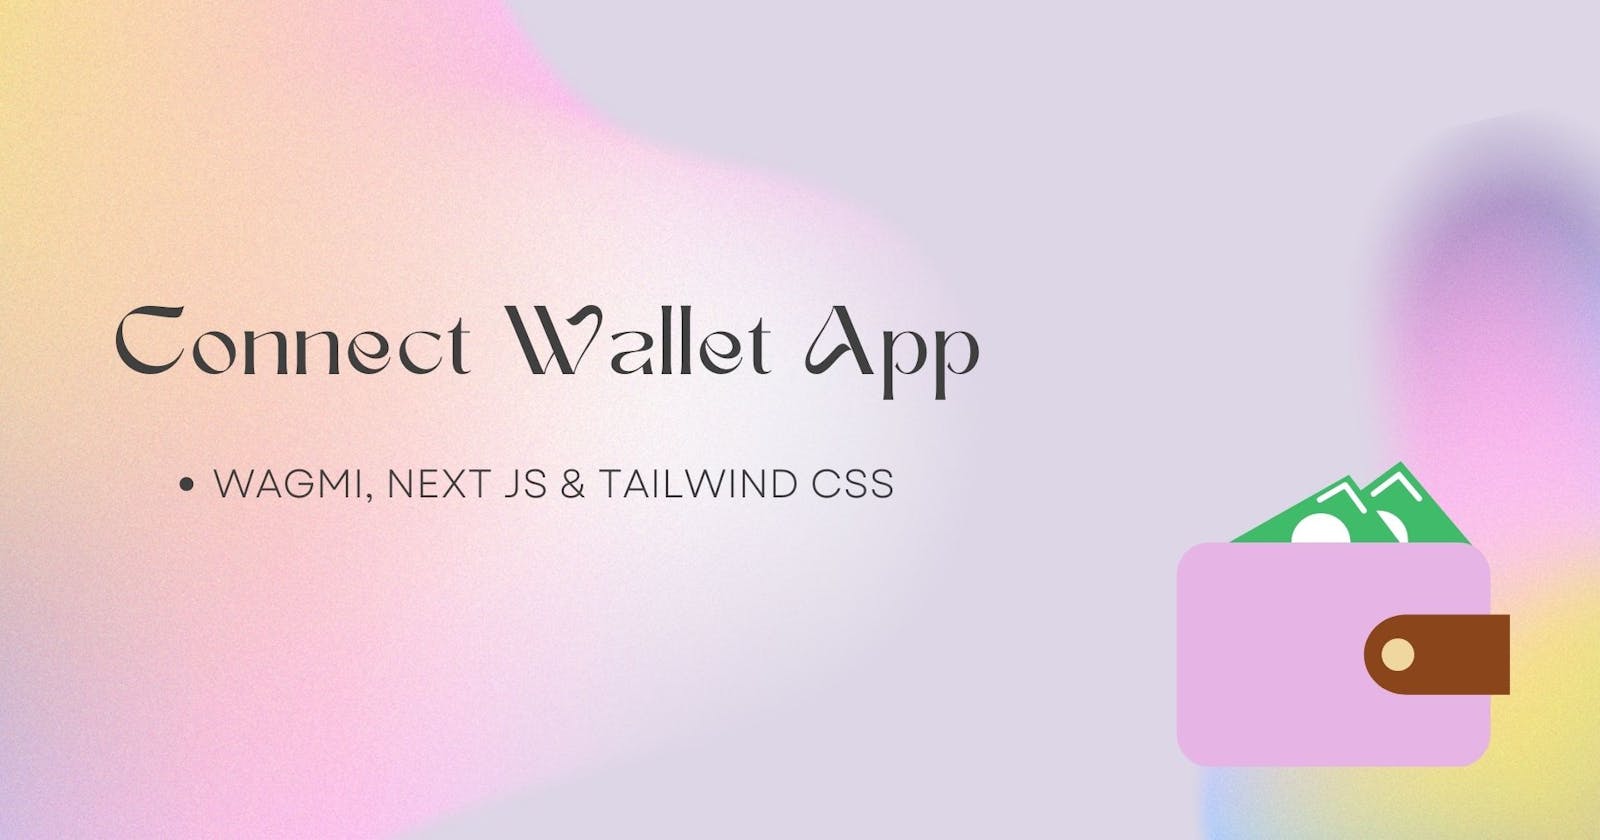 Connect Wallet App using WAGMI and Tailwind CSS